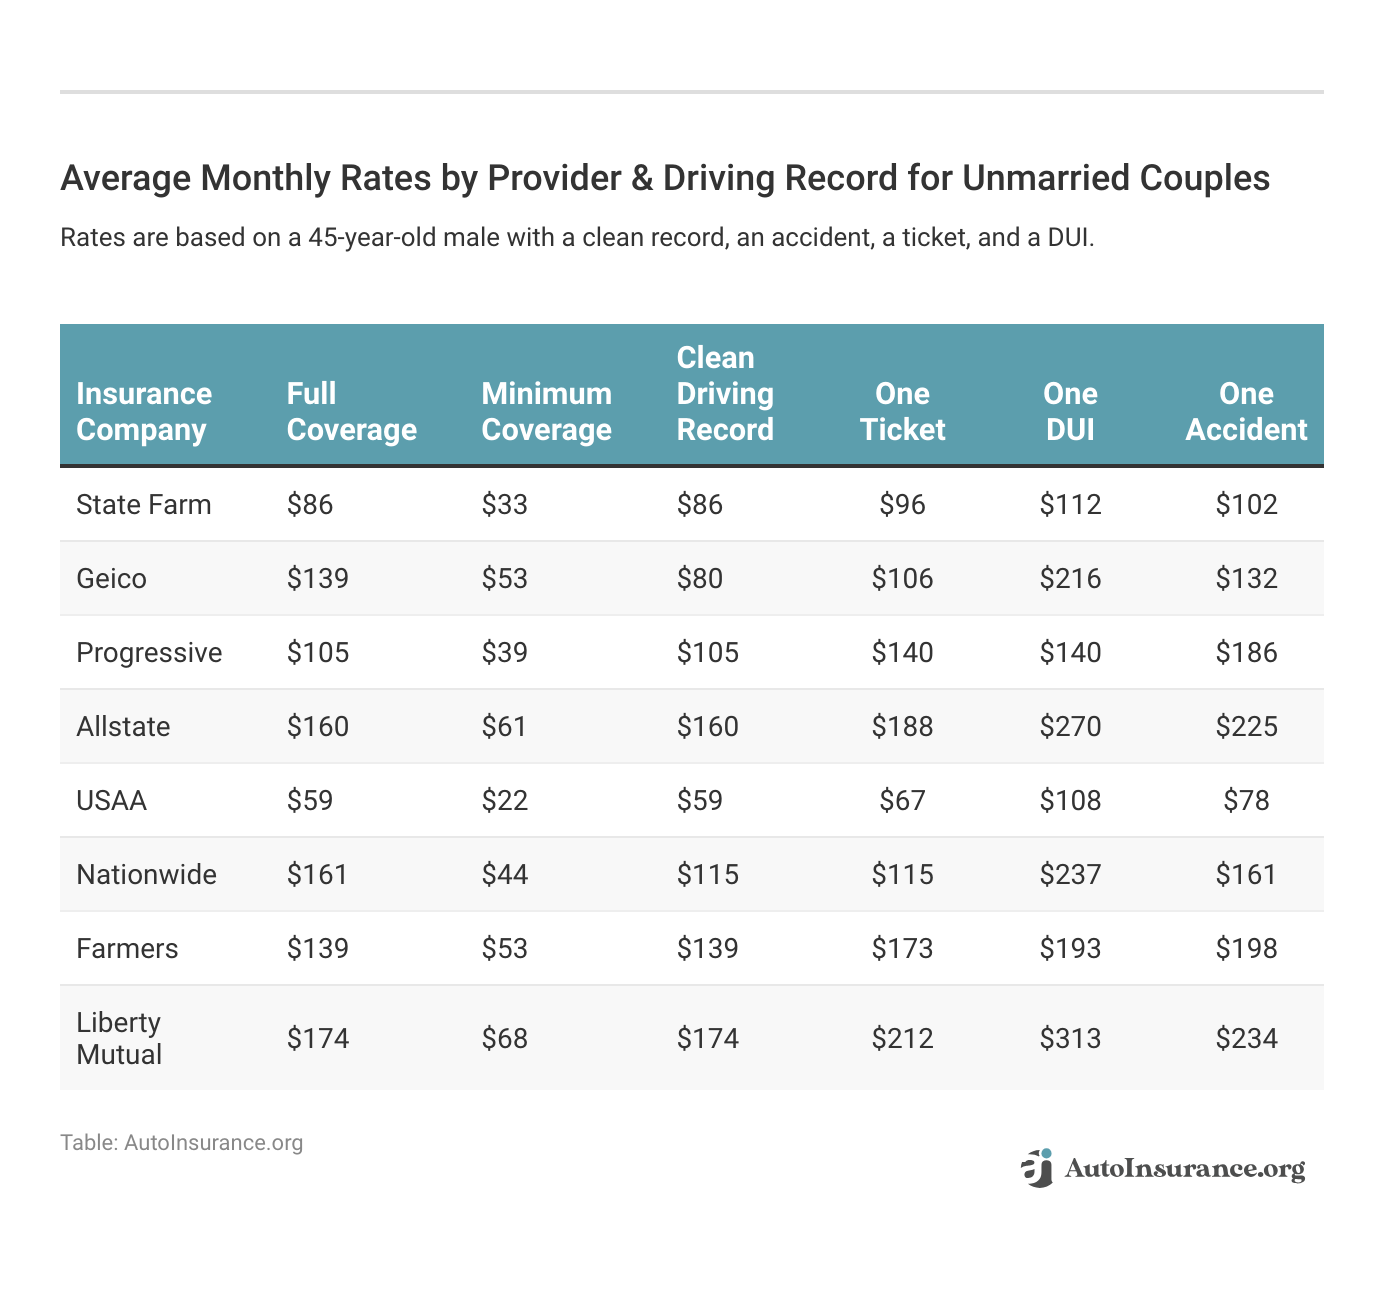 <h3>Average Monthly Rates by Provider & Driving Record for Unmarried Couples</h3>